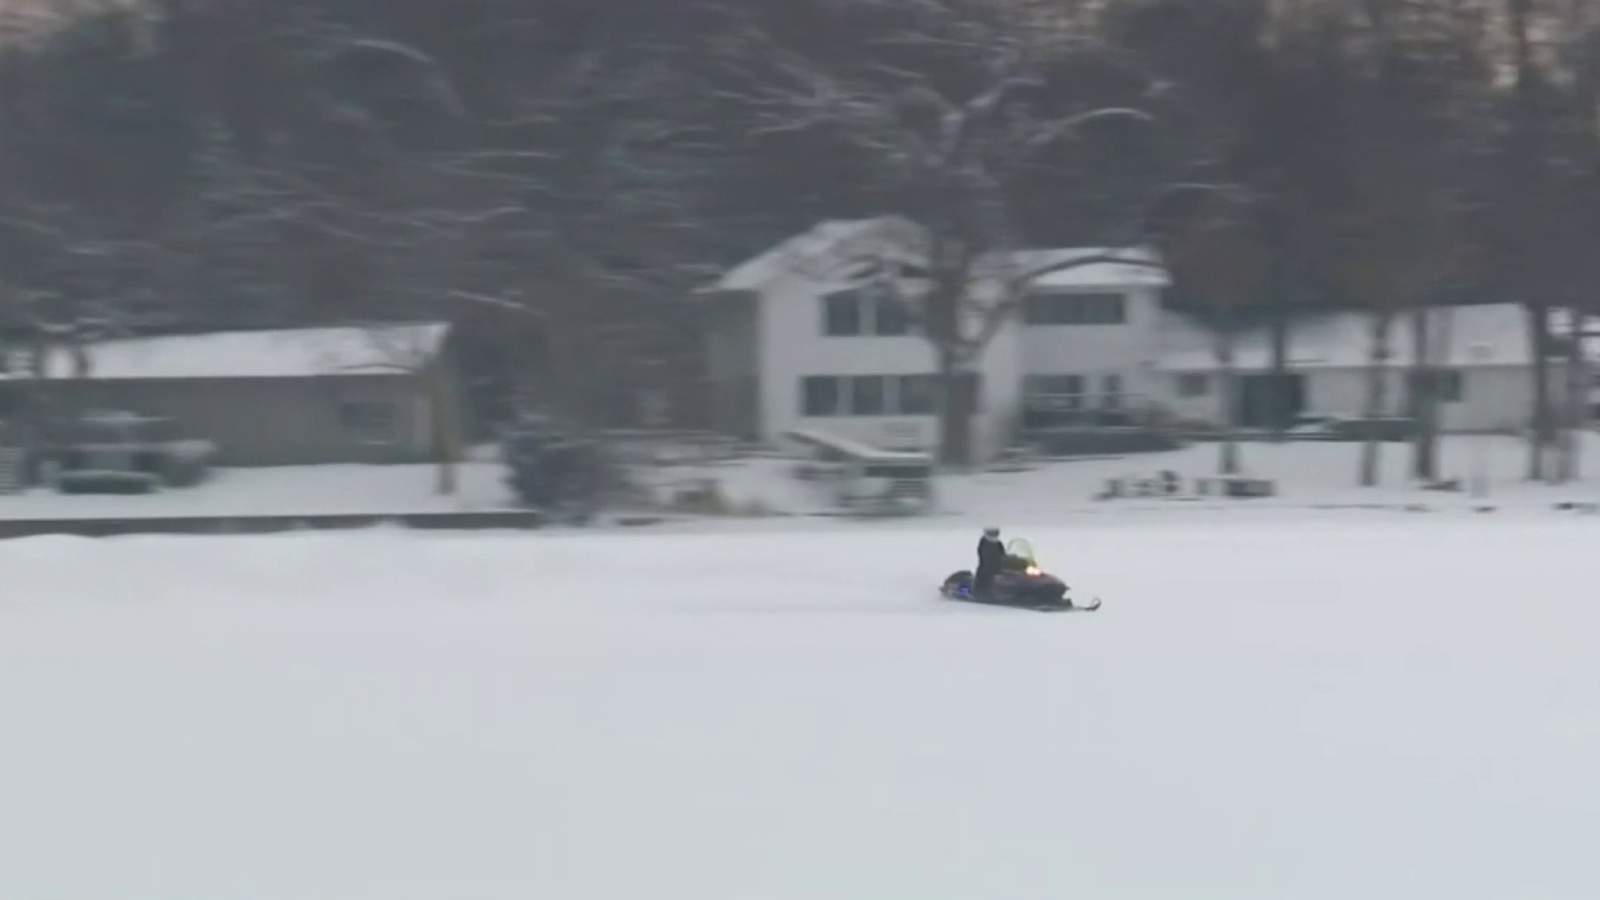 Nightside Report Jan. 24, 2021: Man dies after snowmobile crashes through frozen Wolverine Lake, several inches of snow expected Monday